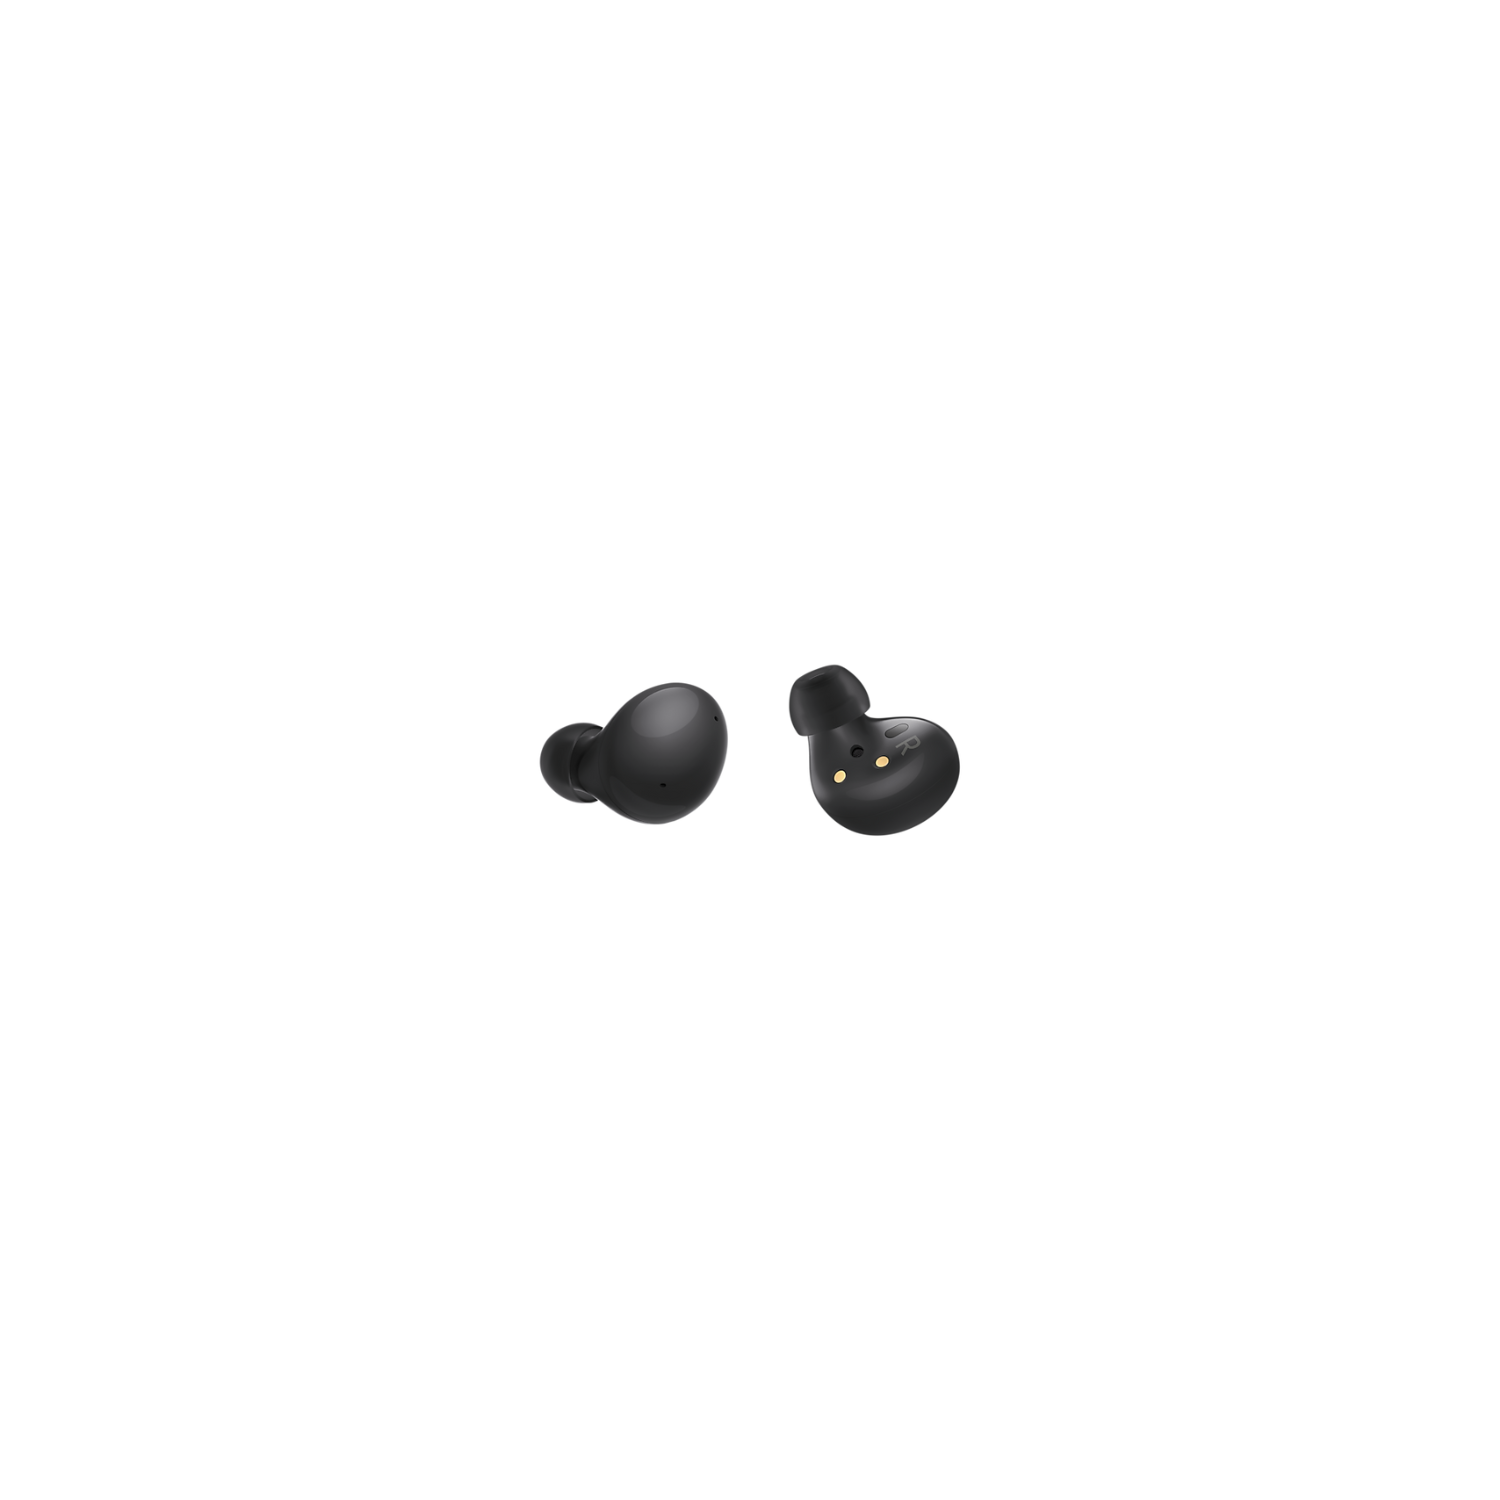 Samsung Galaxy Buds2 In-Ear Noise Cancelling Truly Wireless Headphones - Black - Refurbished (Good)